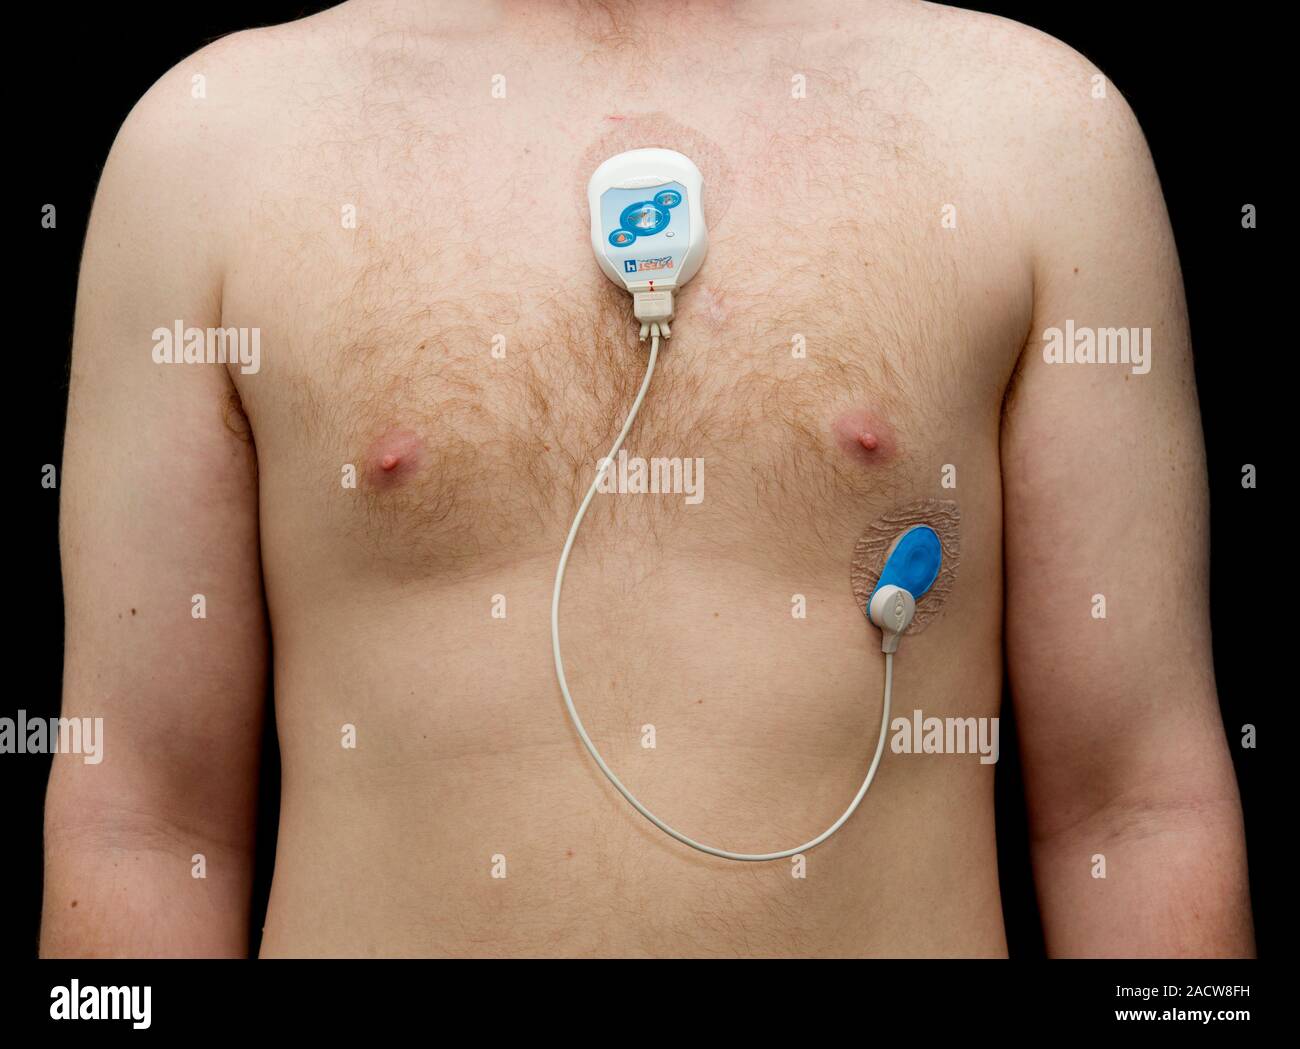 24-hour Holter monitoring: Uses, results, and what to expect